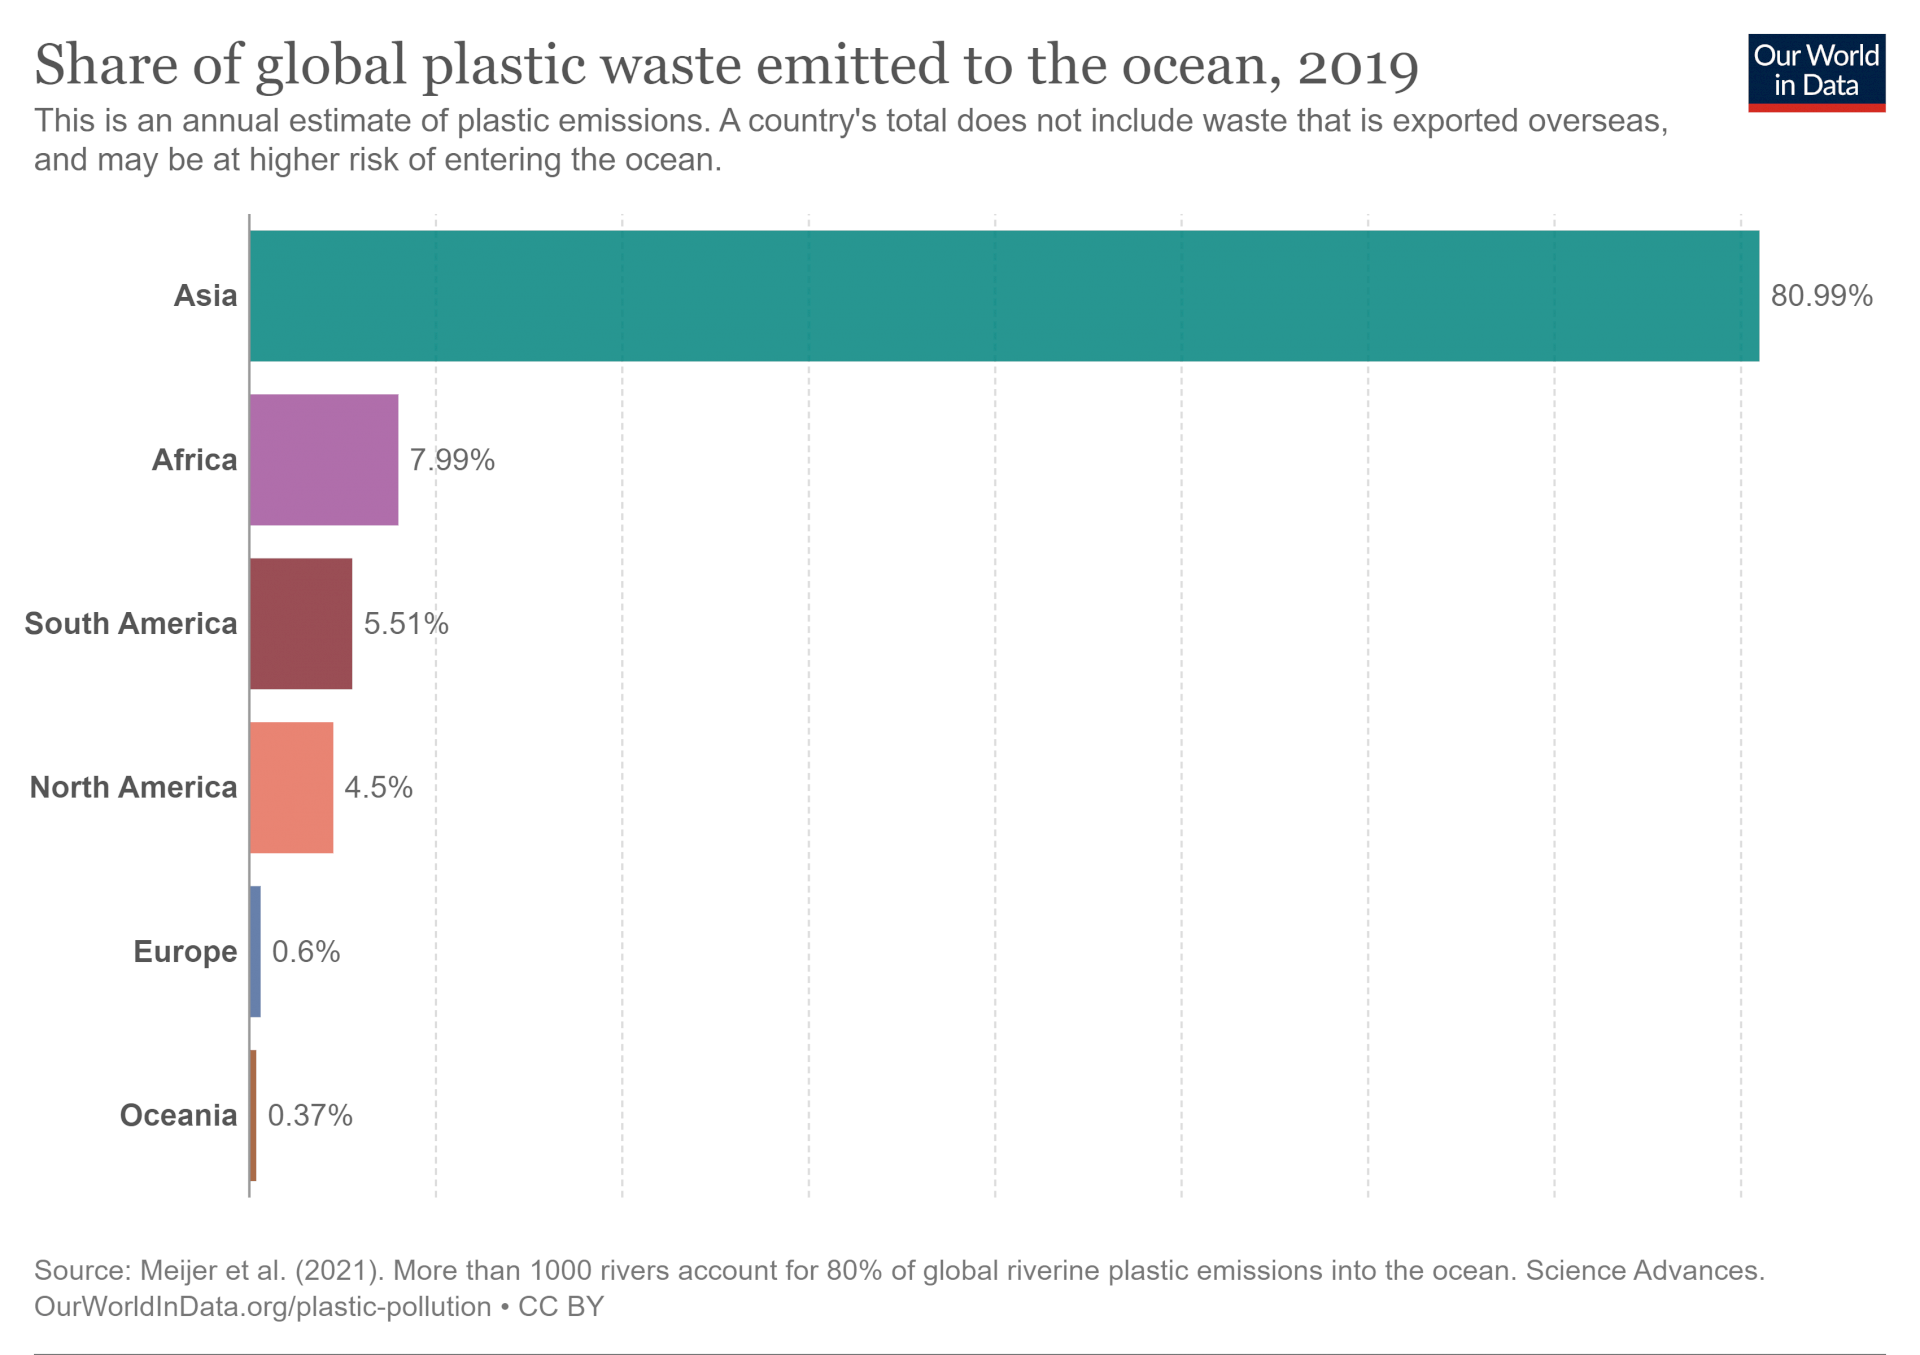 Disproportionate Percentage of Global Plastic Waste Emitted Into the Ocean by Asia